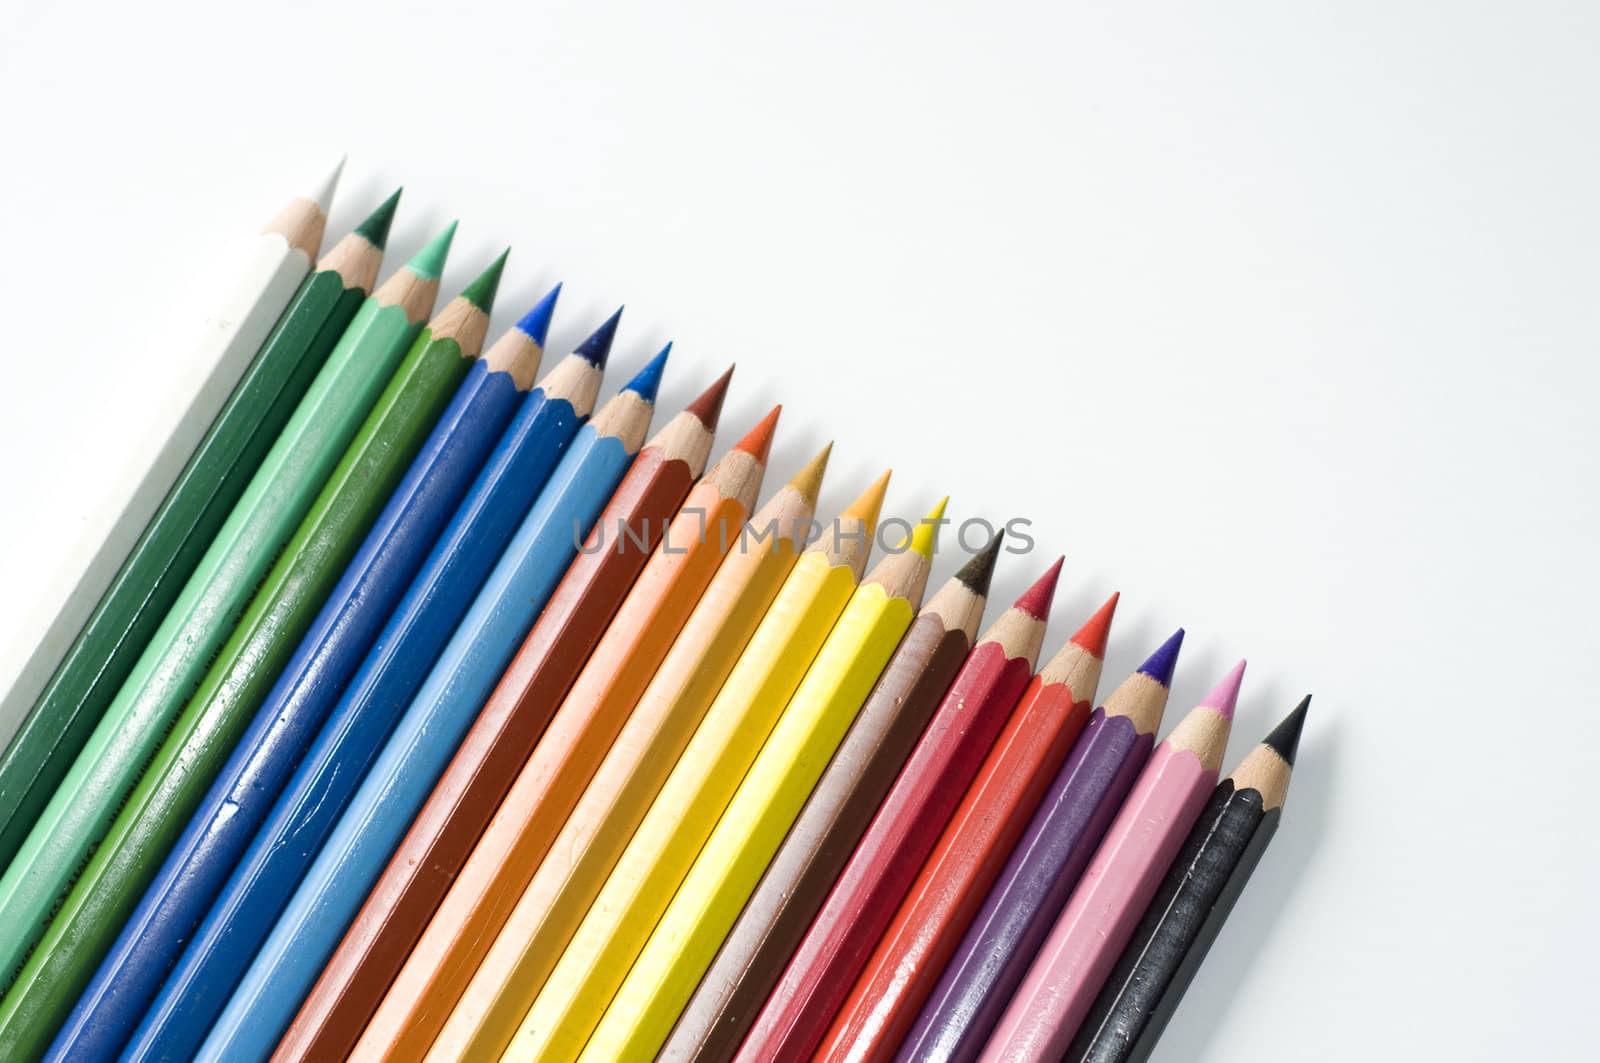 Colored pencils on white background. Sharpened rods. Colorful.